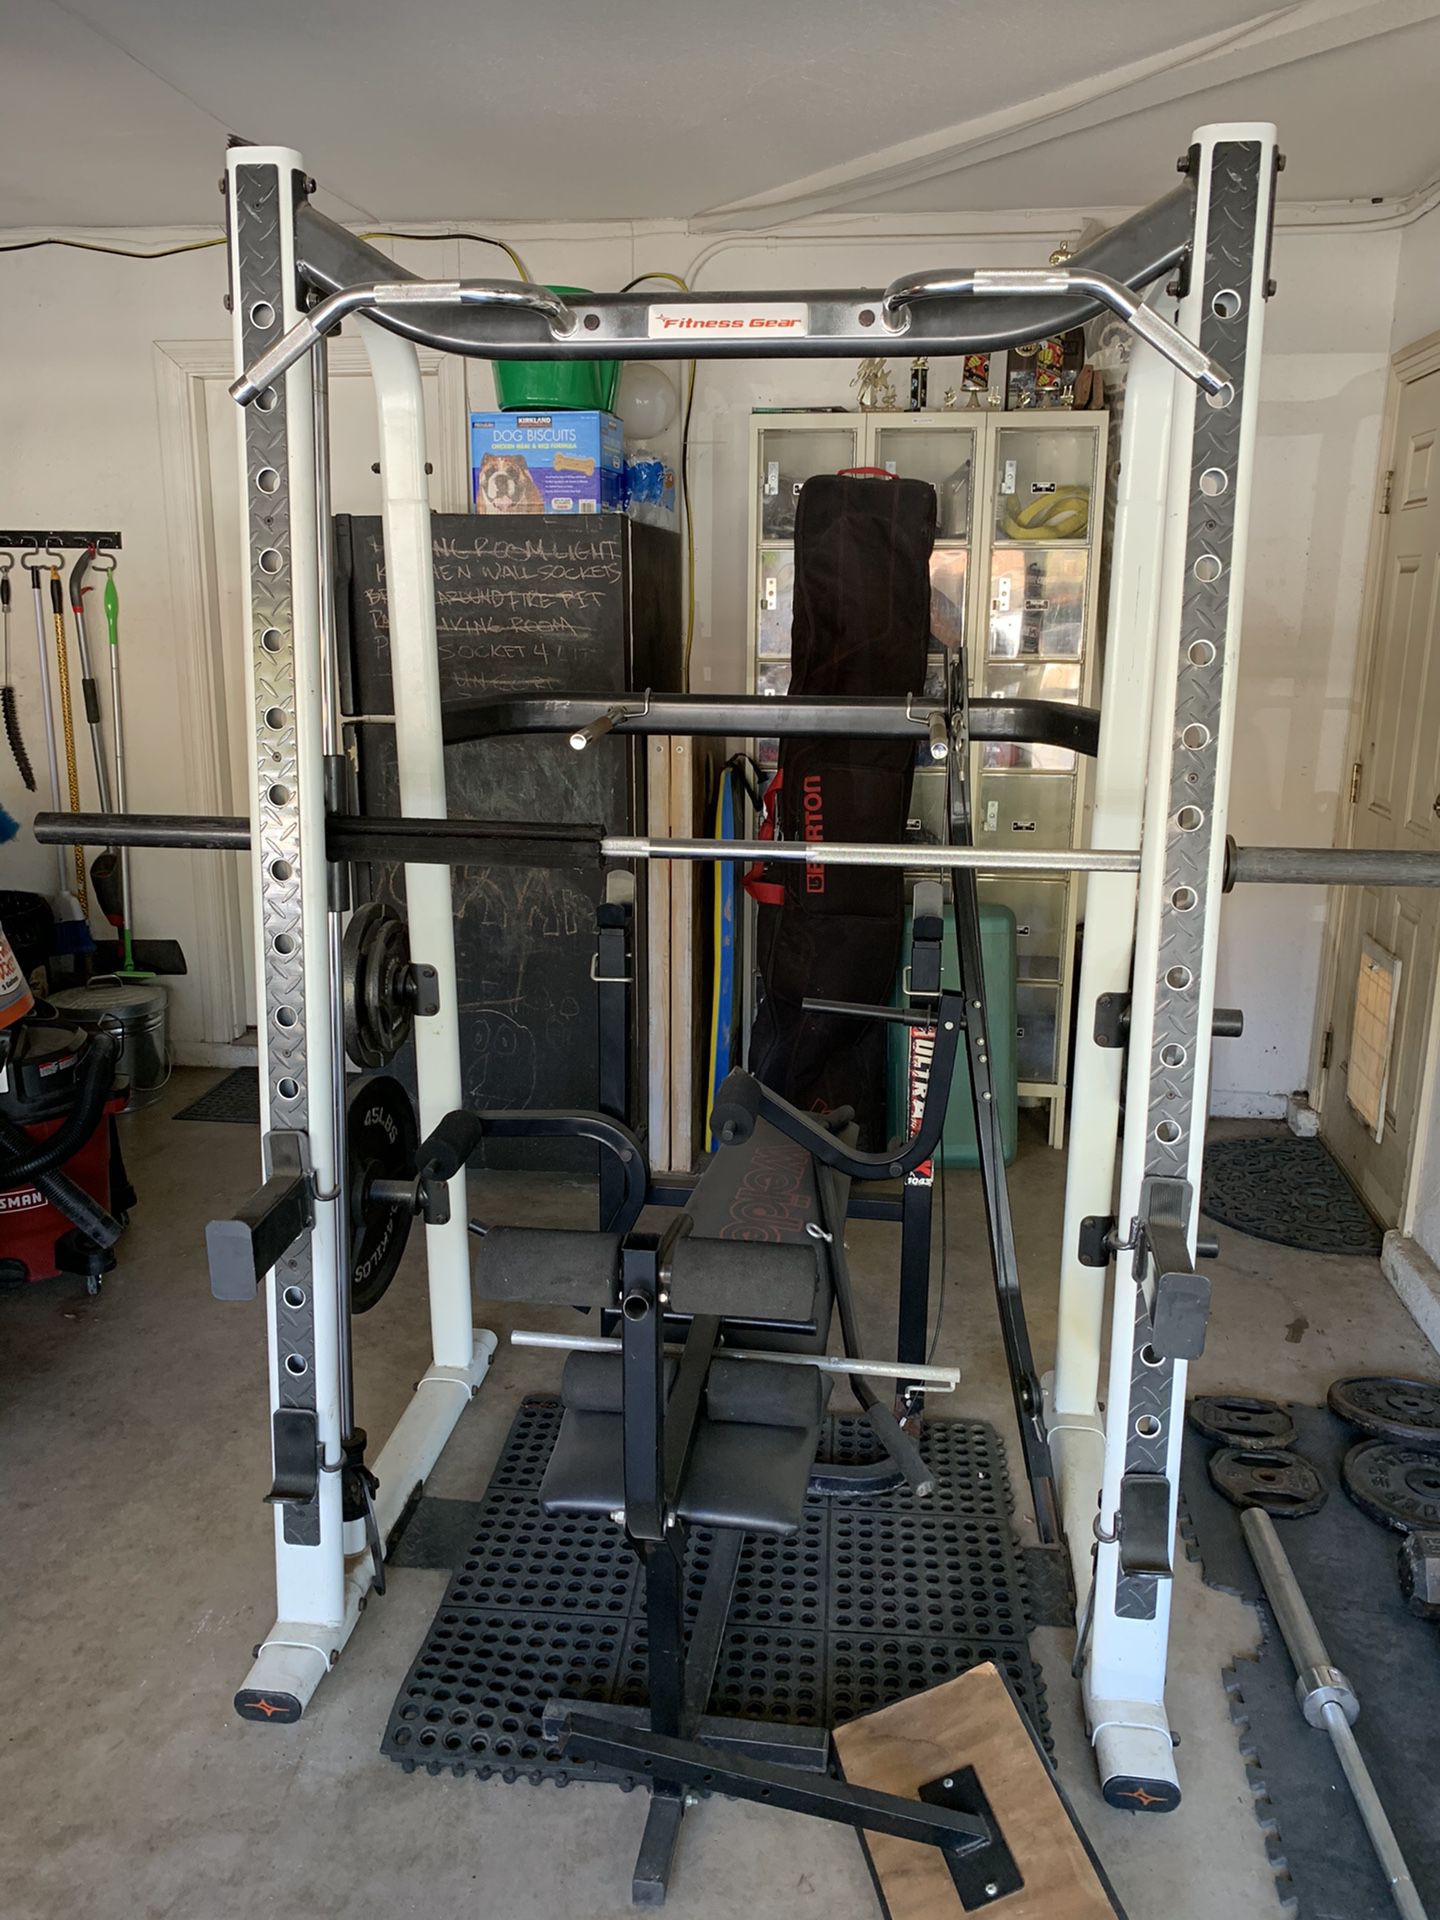 Fitness Gear “smith machine” bench, weights and dumbells